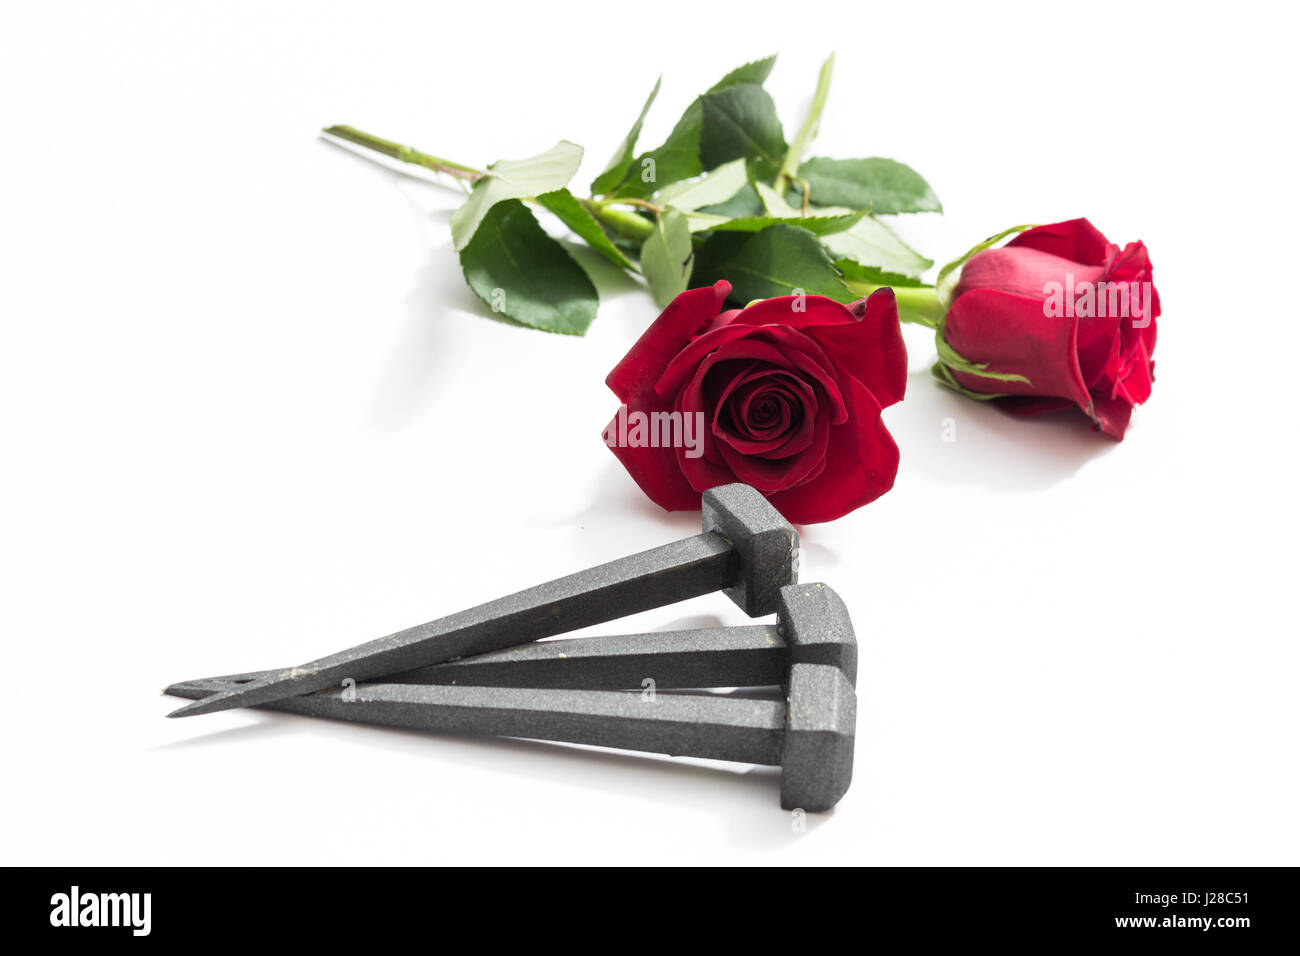 Jesus Christ nails from the Crucifixion and red roses on a white background. Stock Photo